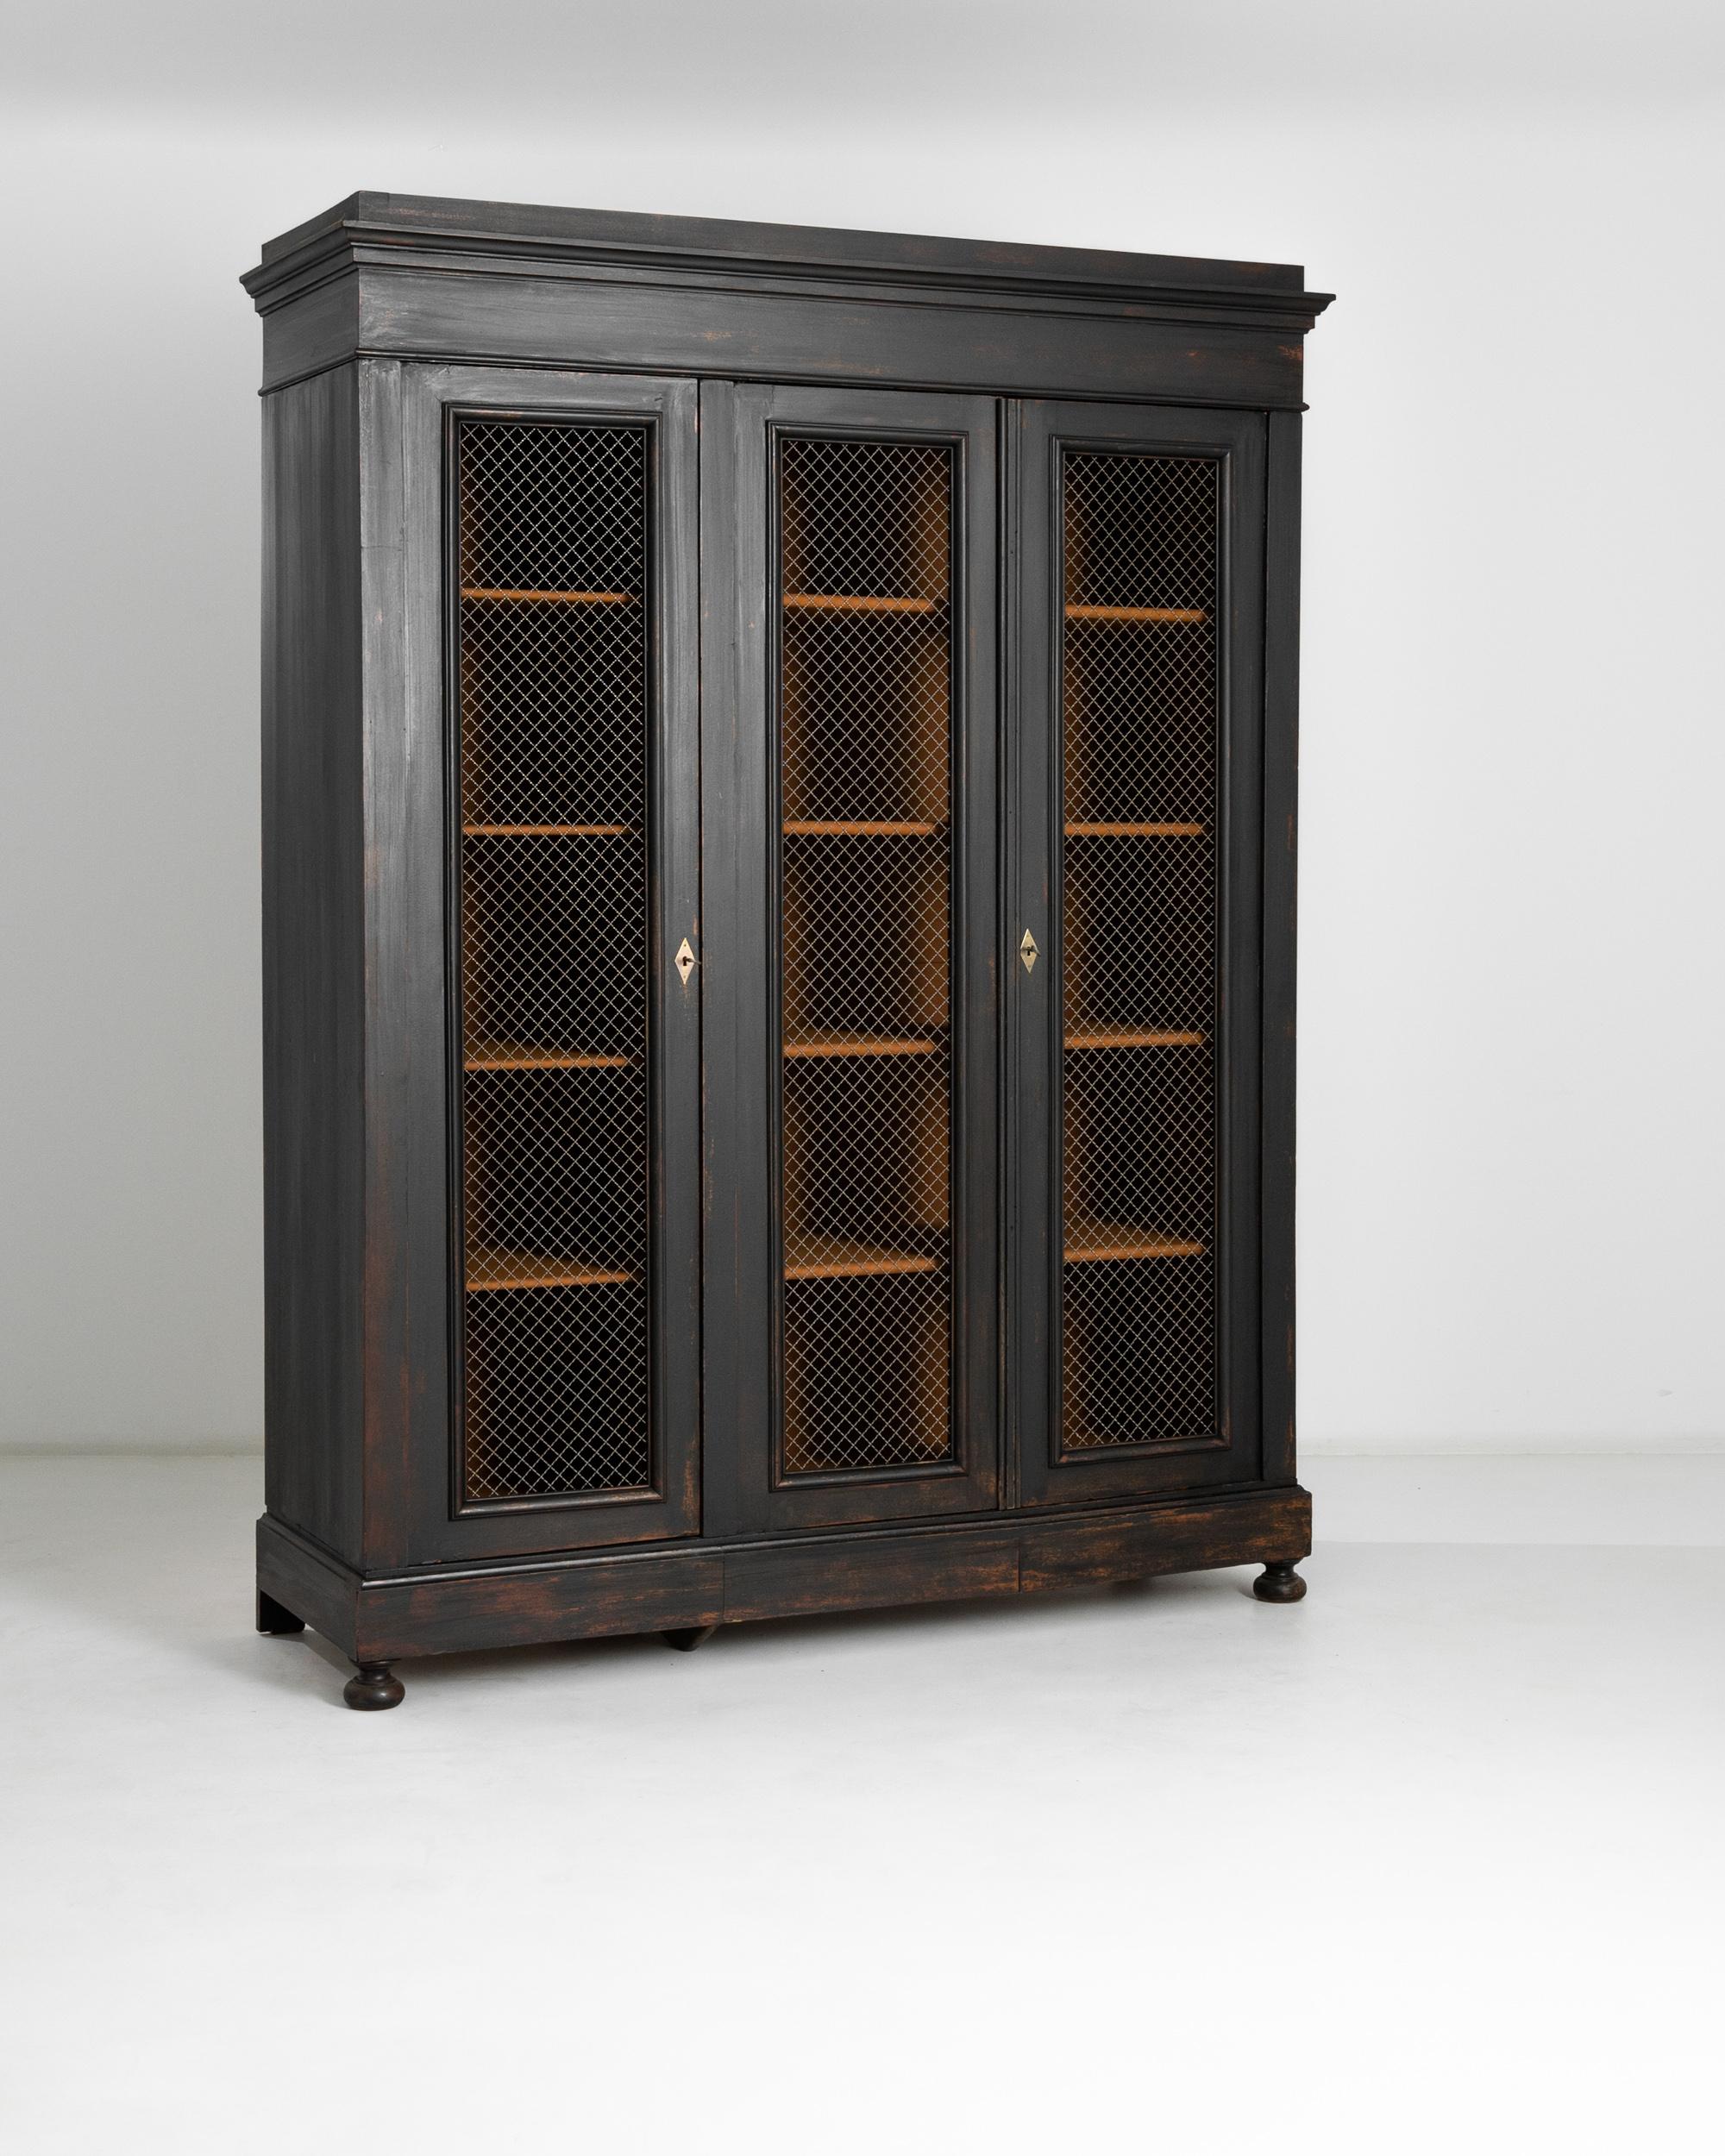 This antique linen cabinet was crafted in Germany, circa 1800. A beautifully patinated tall black cabinet standing on ball feet, featuring two front doors, an ample five shelves interior, three discreet lower drawers and a beveled top. The doors are